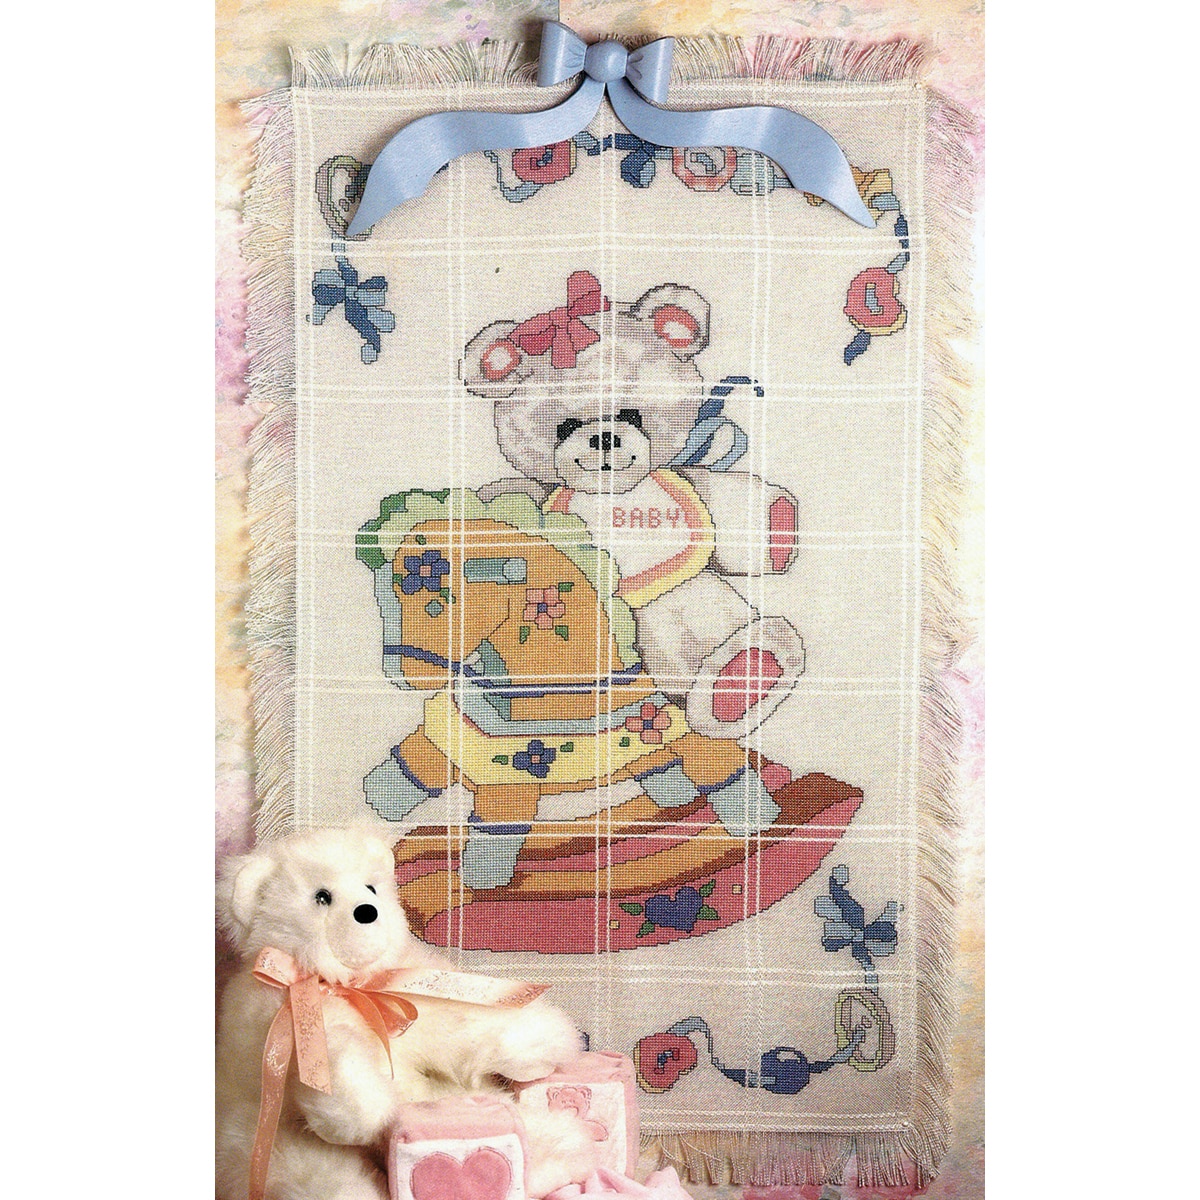 Bear On Rocking Horse Baby Afghan Counted Cross Stitch Kit  